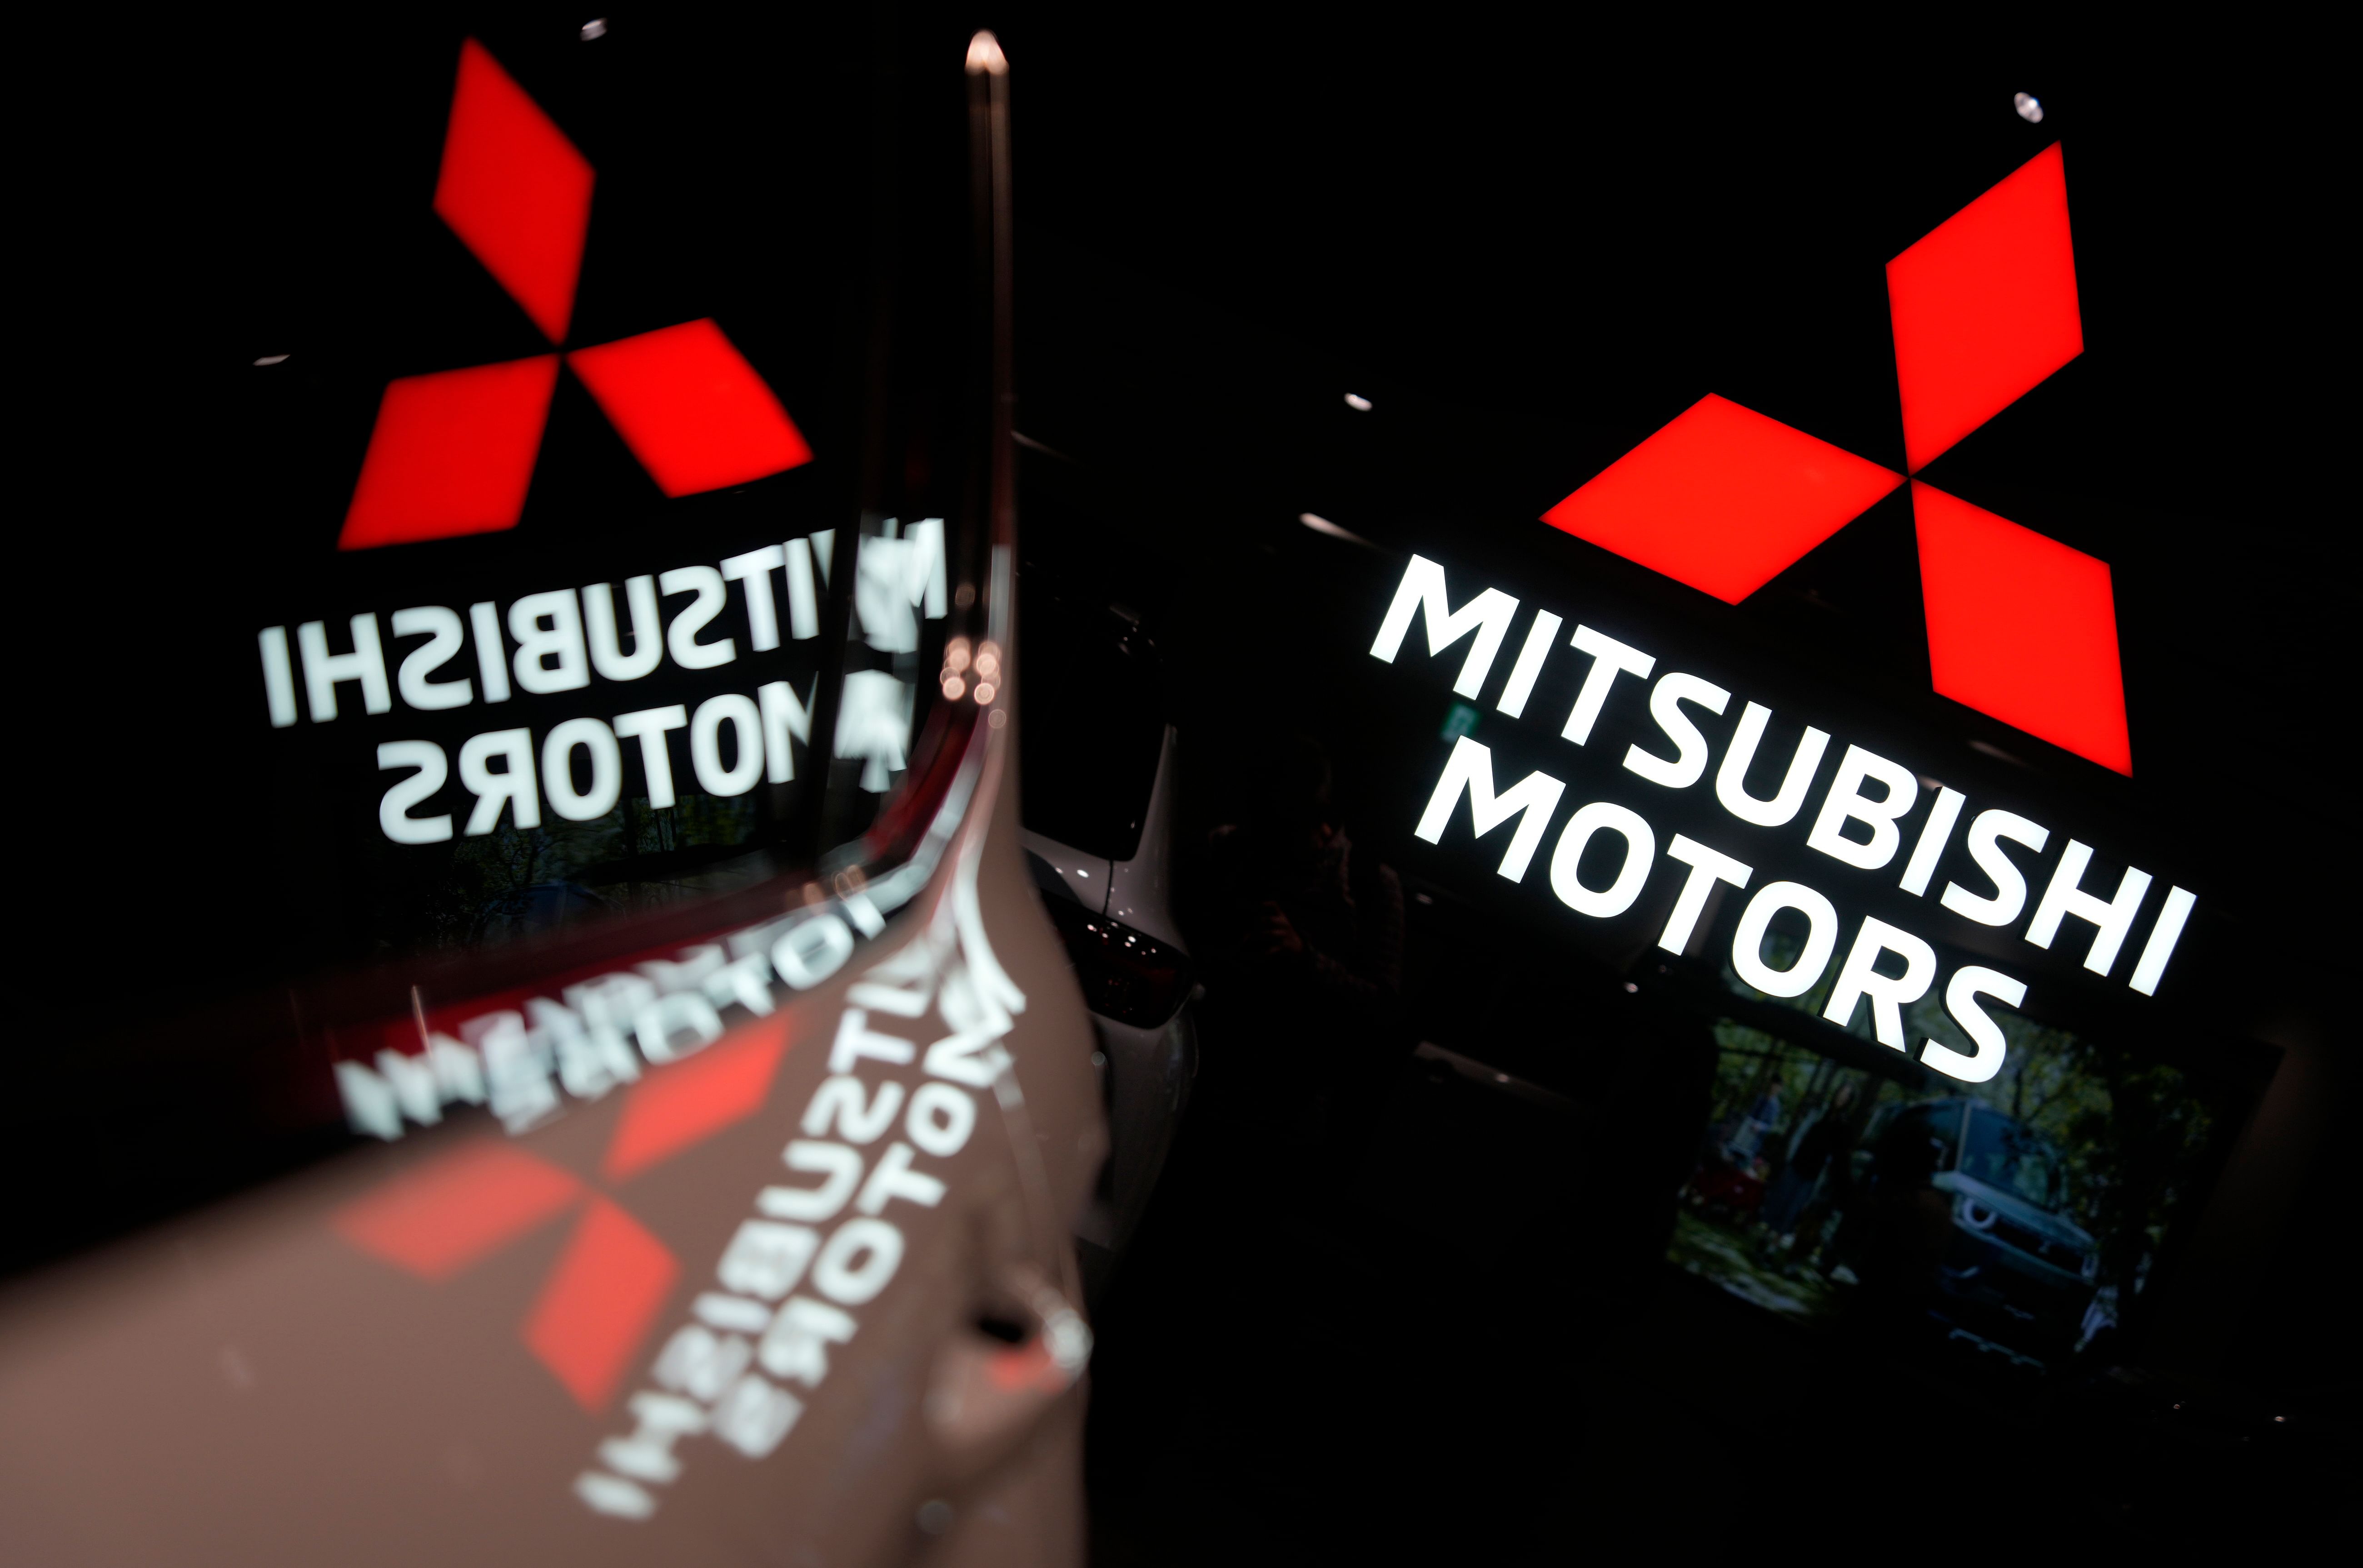 Mitsubishi Motors told by US court to pay $1.37 billion over car crash